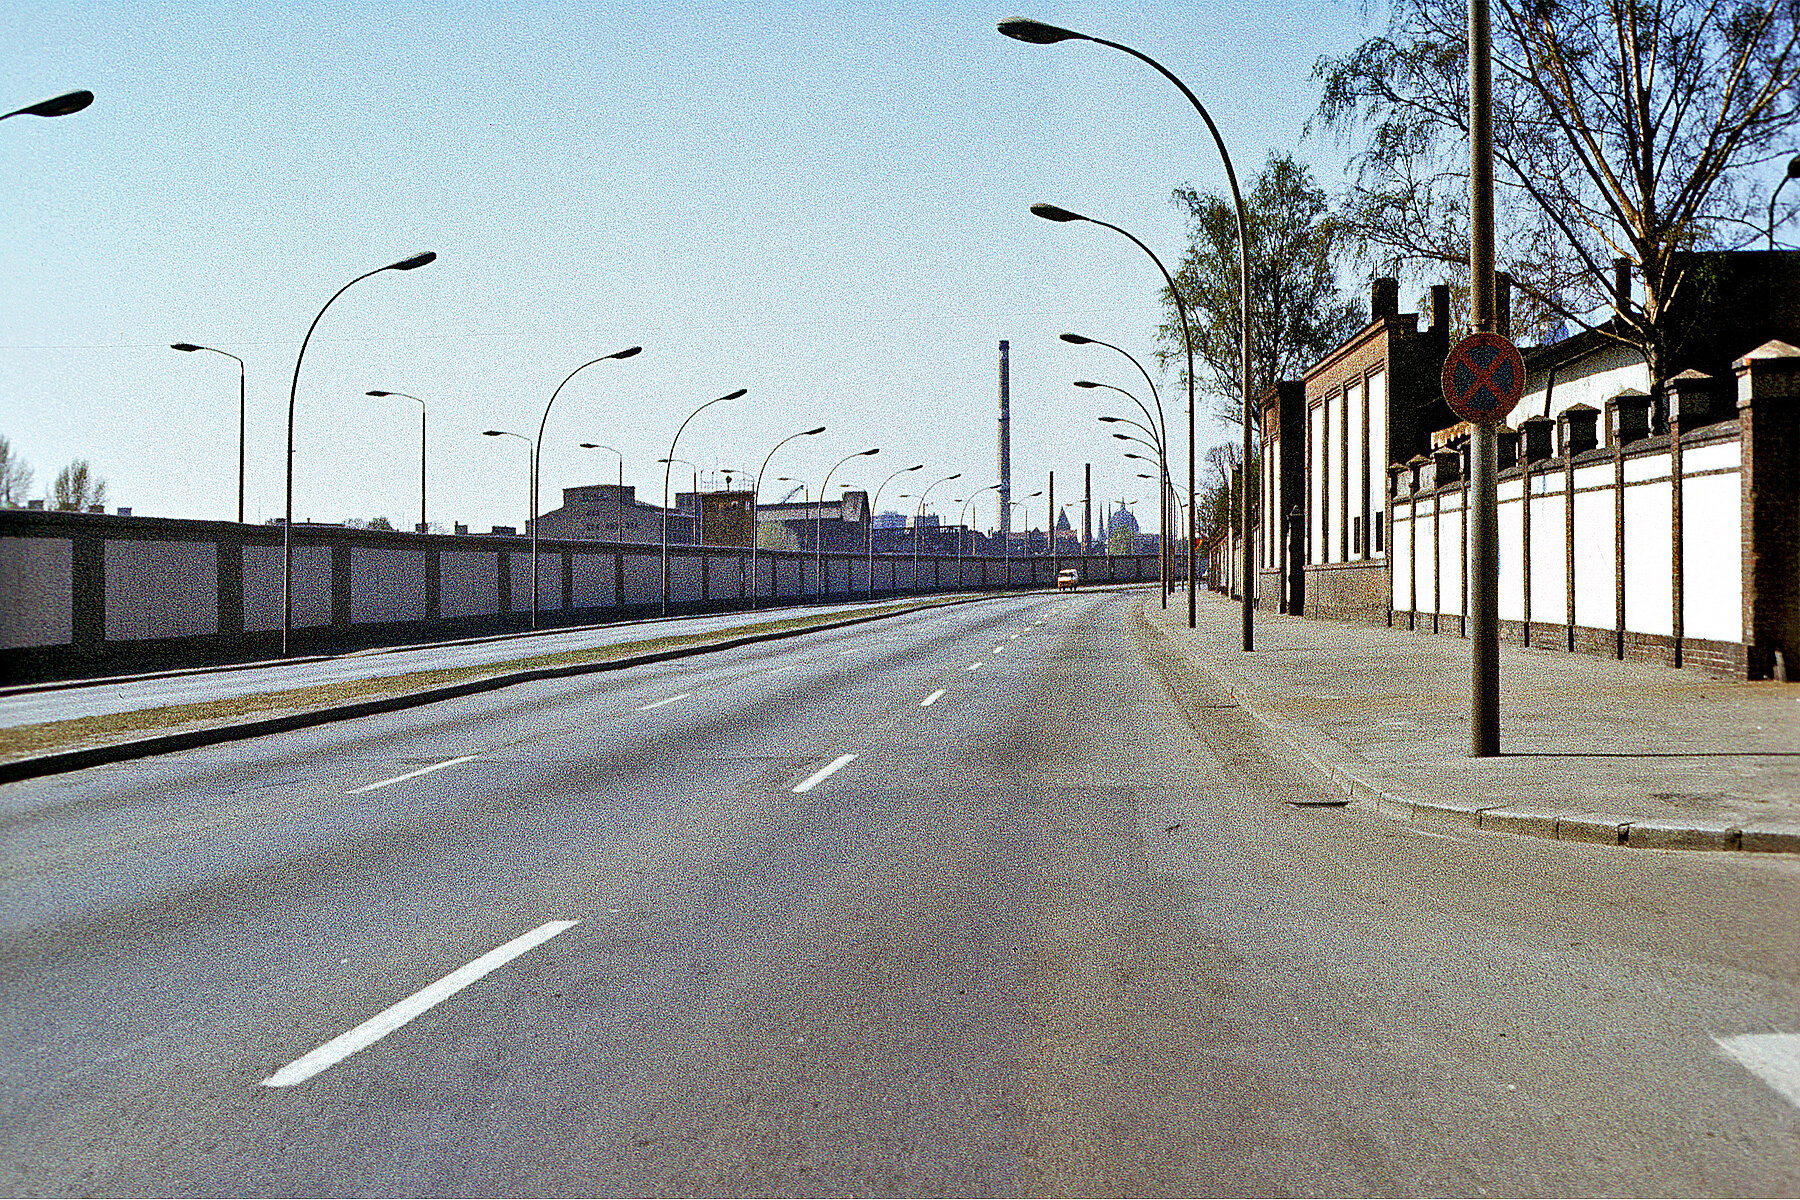 Road course with border installation. Many street lamps face both the road and the border fortifications.